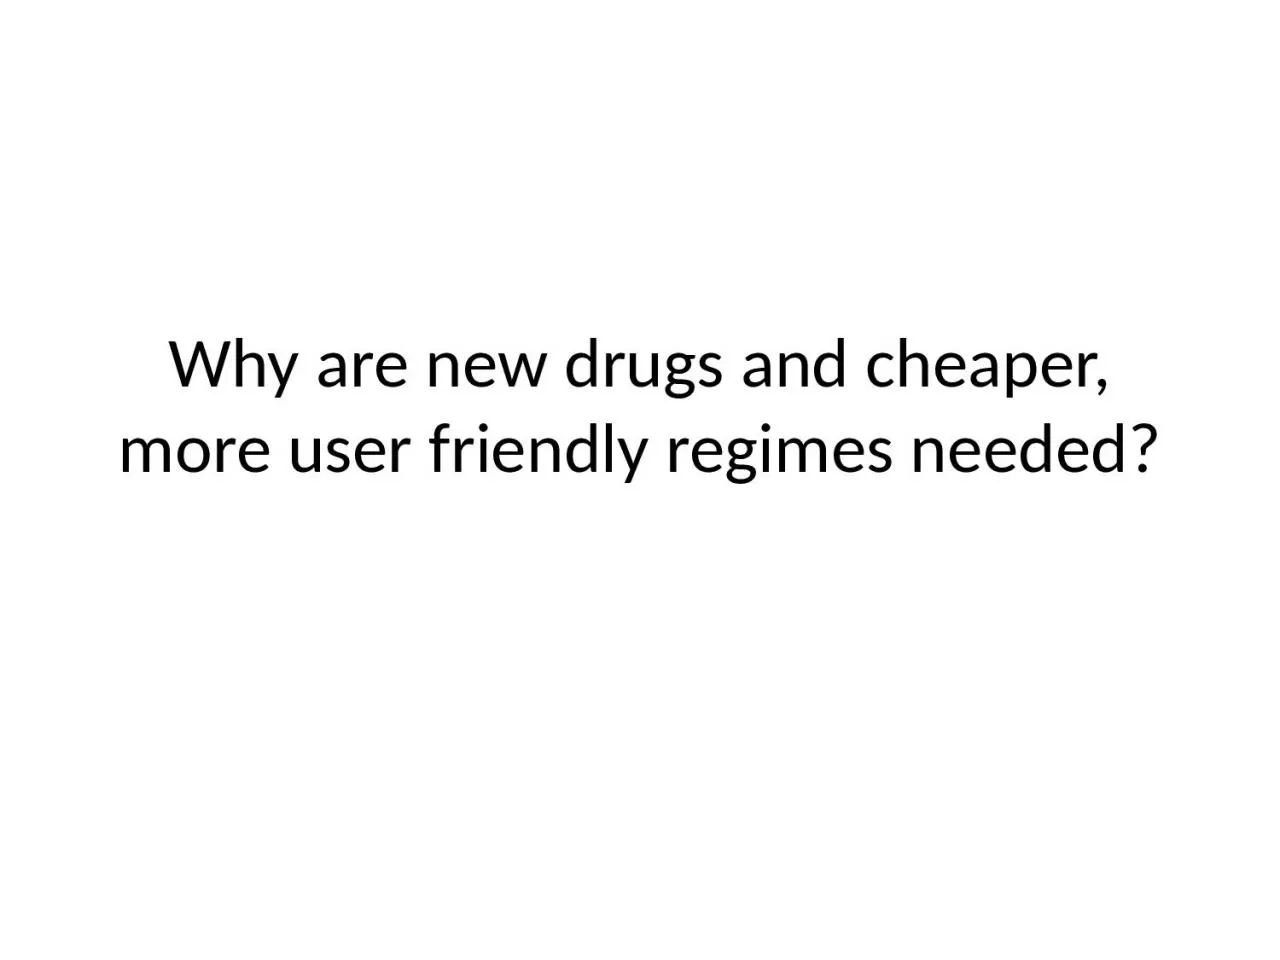 Why are new drugs and cheaper, more user friendly regimes needed?